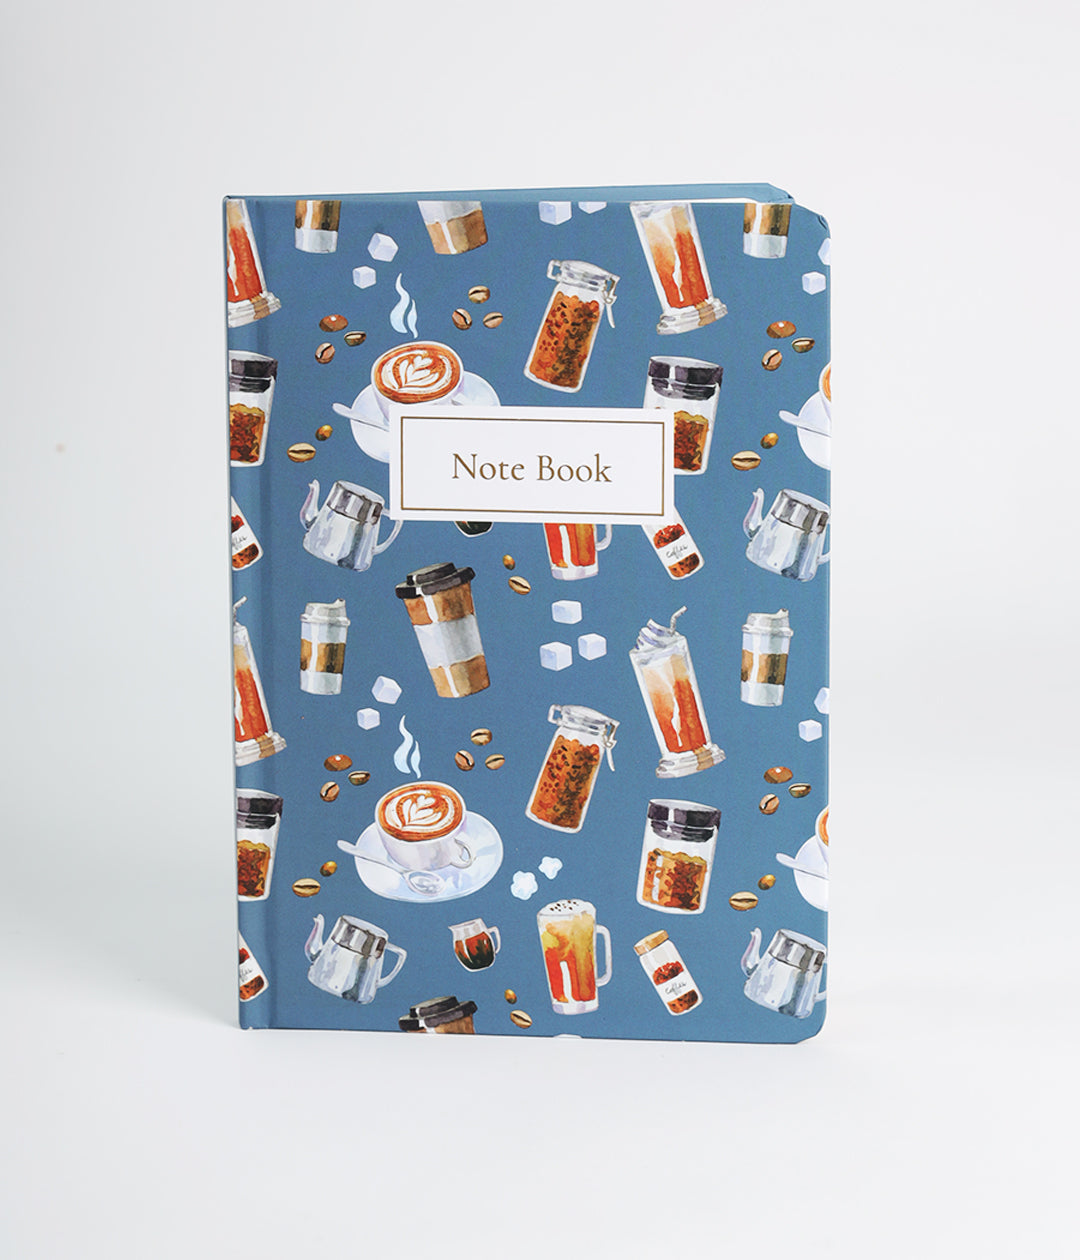 Better Latte Than Never Hardbound Notebook Journal Diary with Hybrid UV Accents